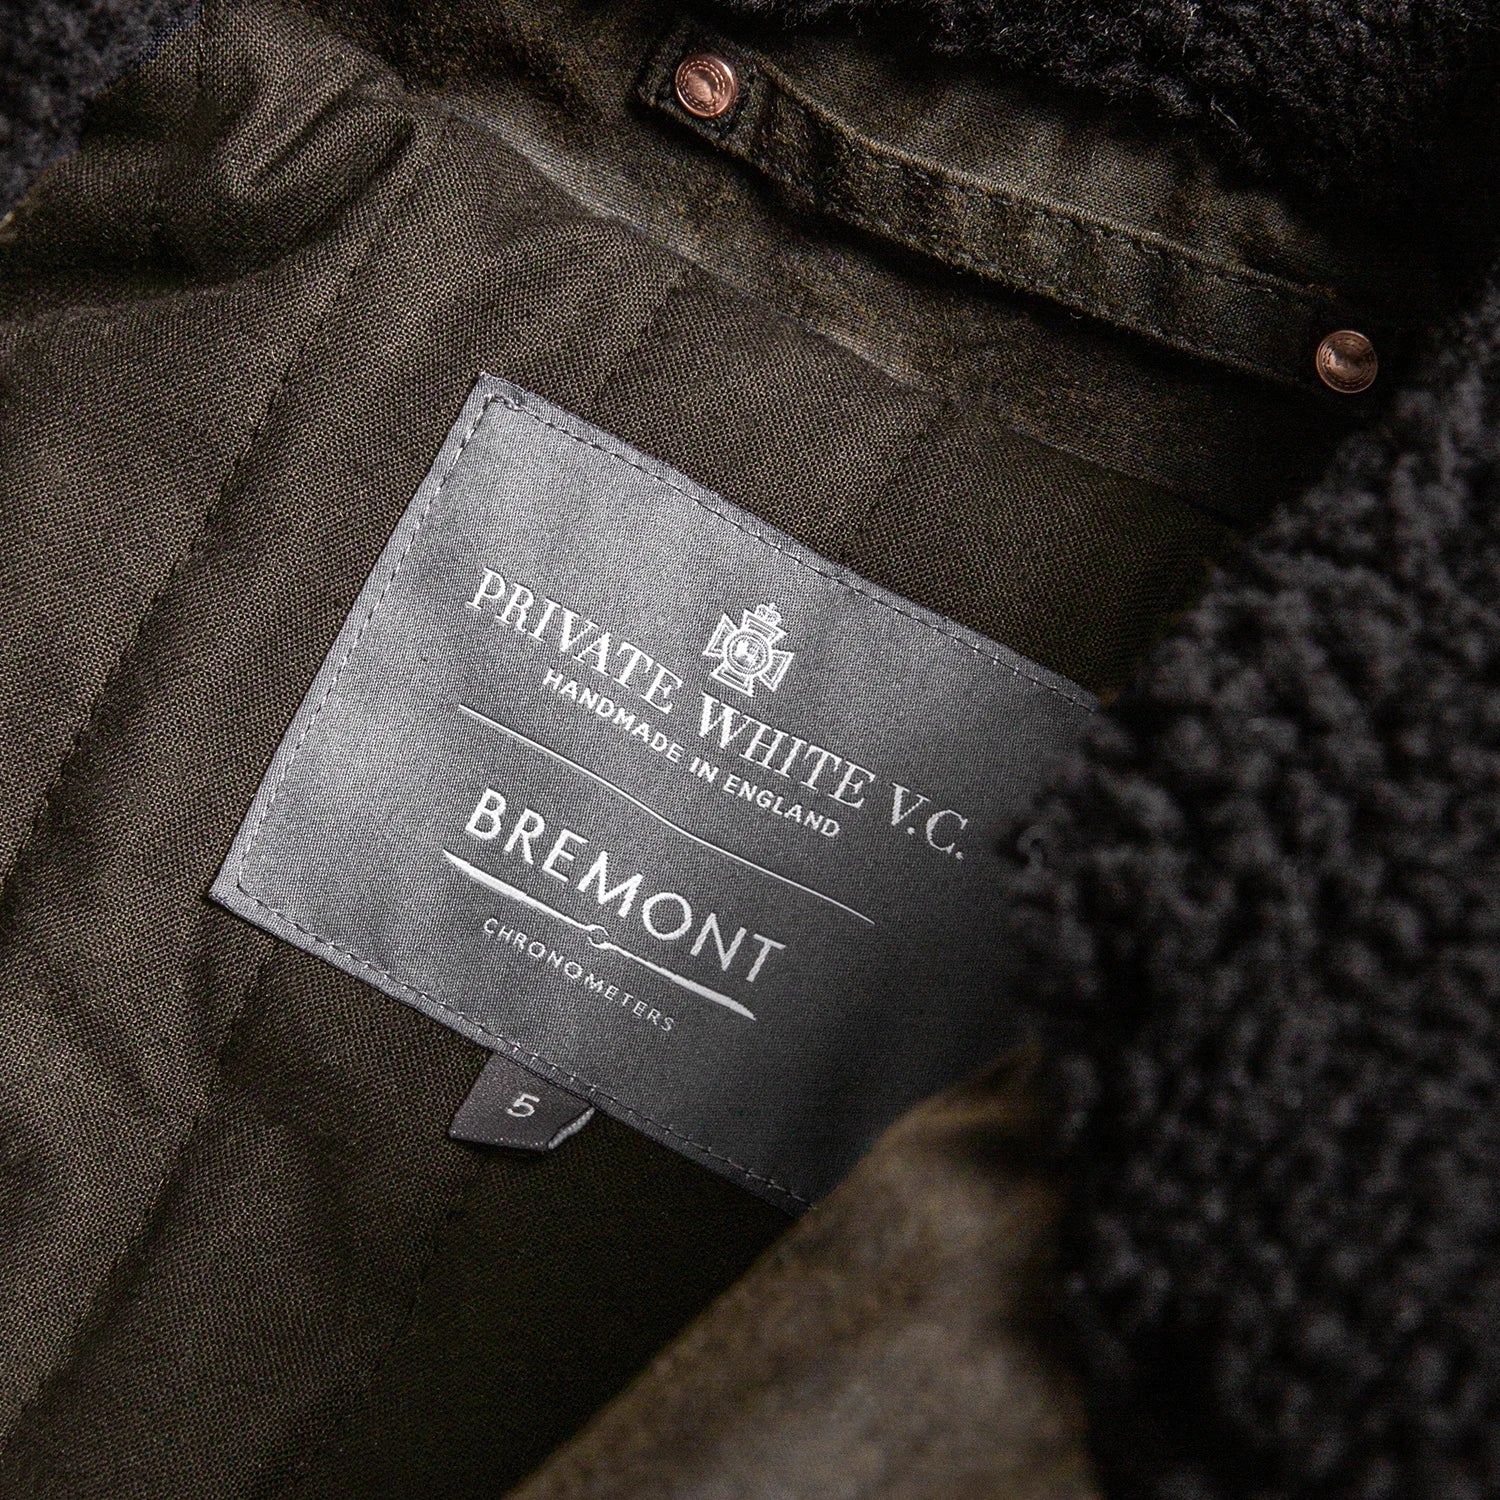 Introducing the exclusive Bremont X Private White V.C. Flight Jacket ...